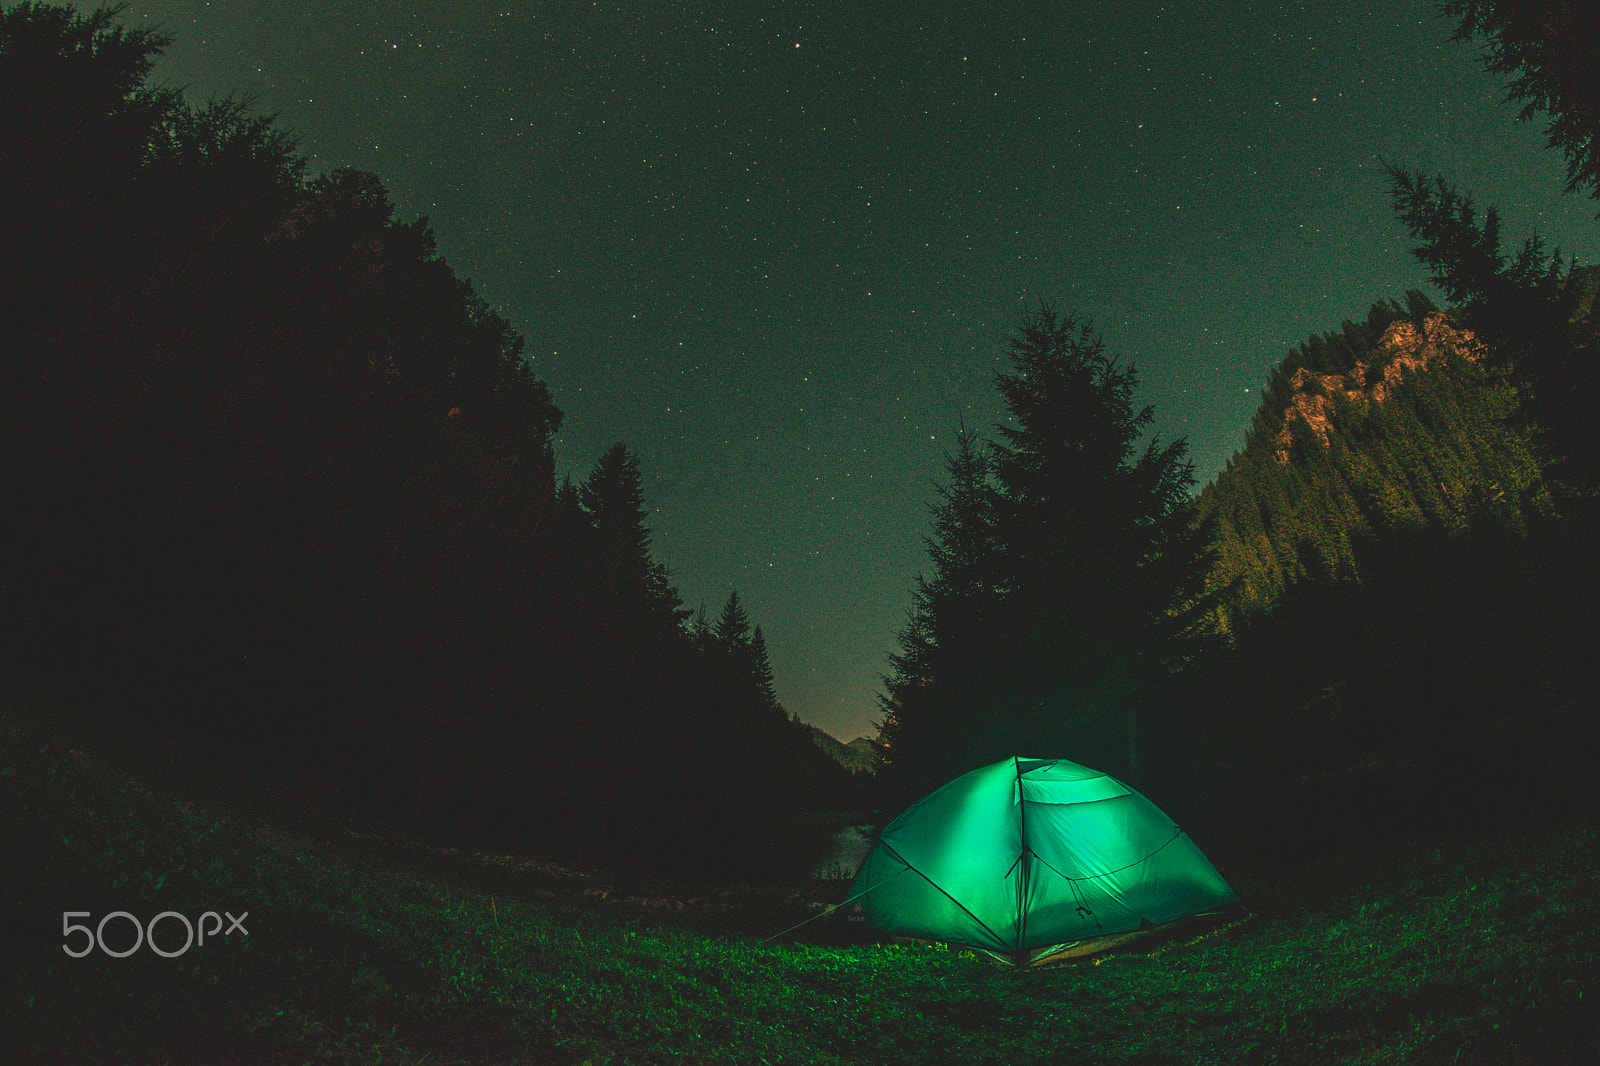 Nikon D5300 sample photo. Glowing tent under a night sky photography